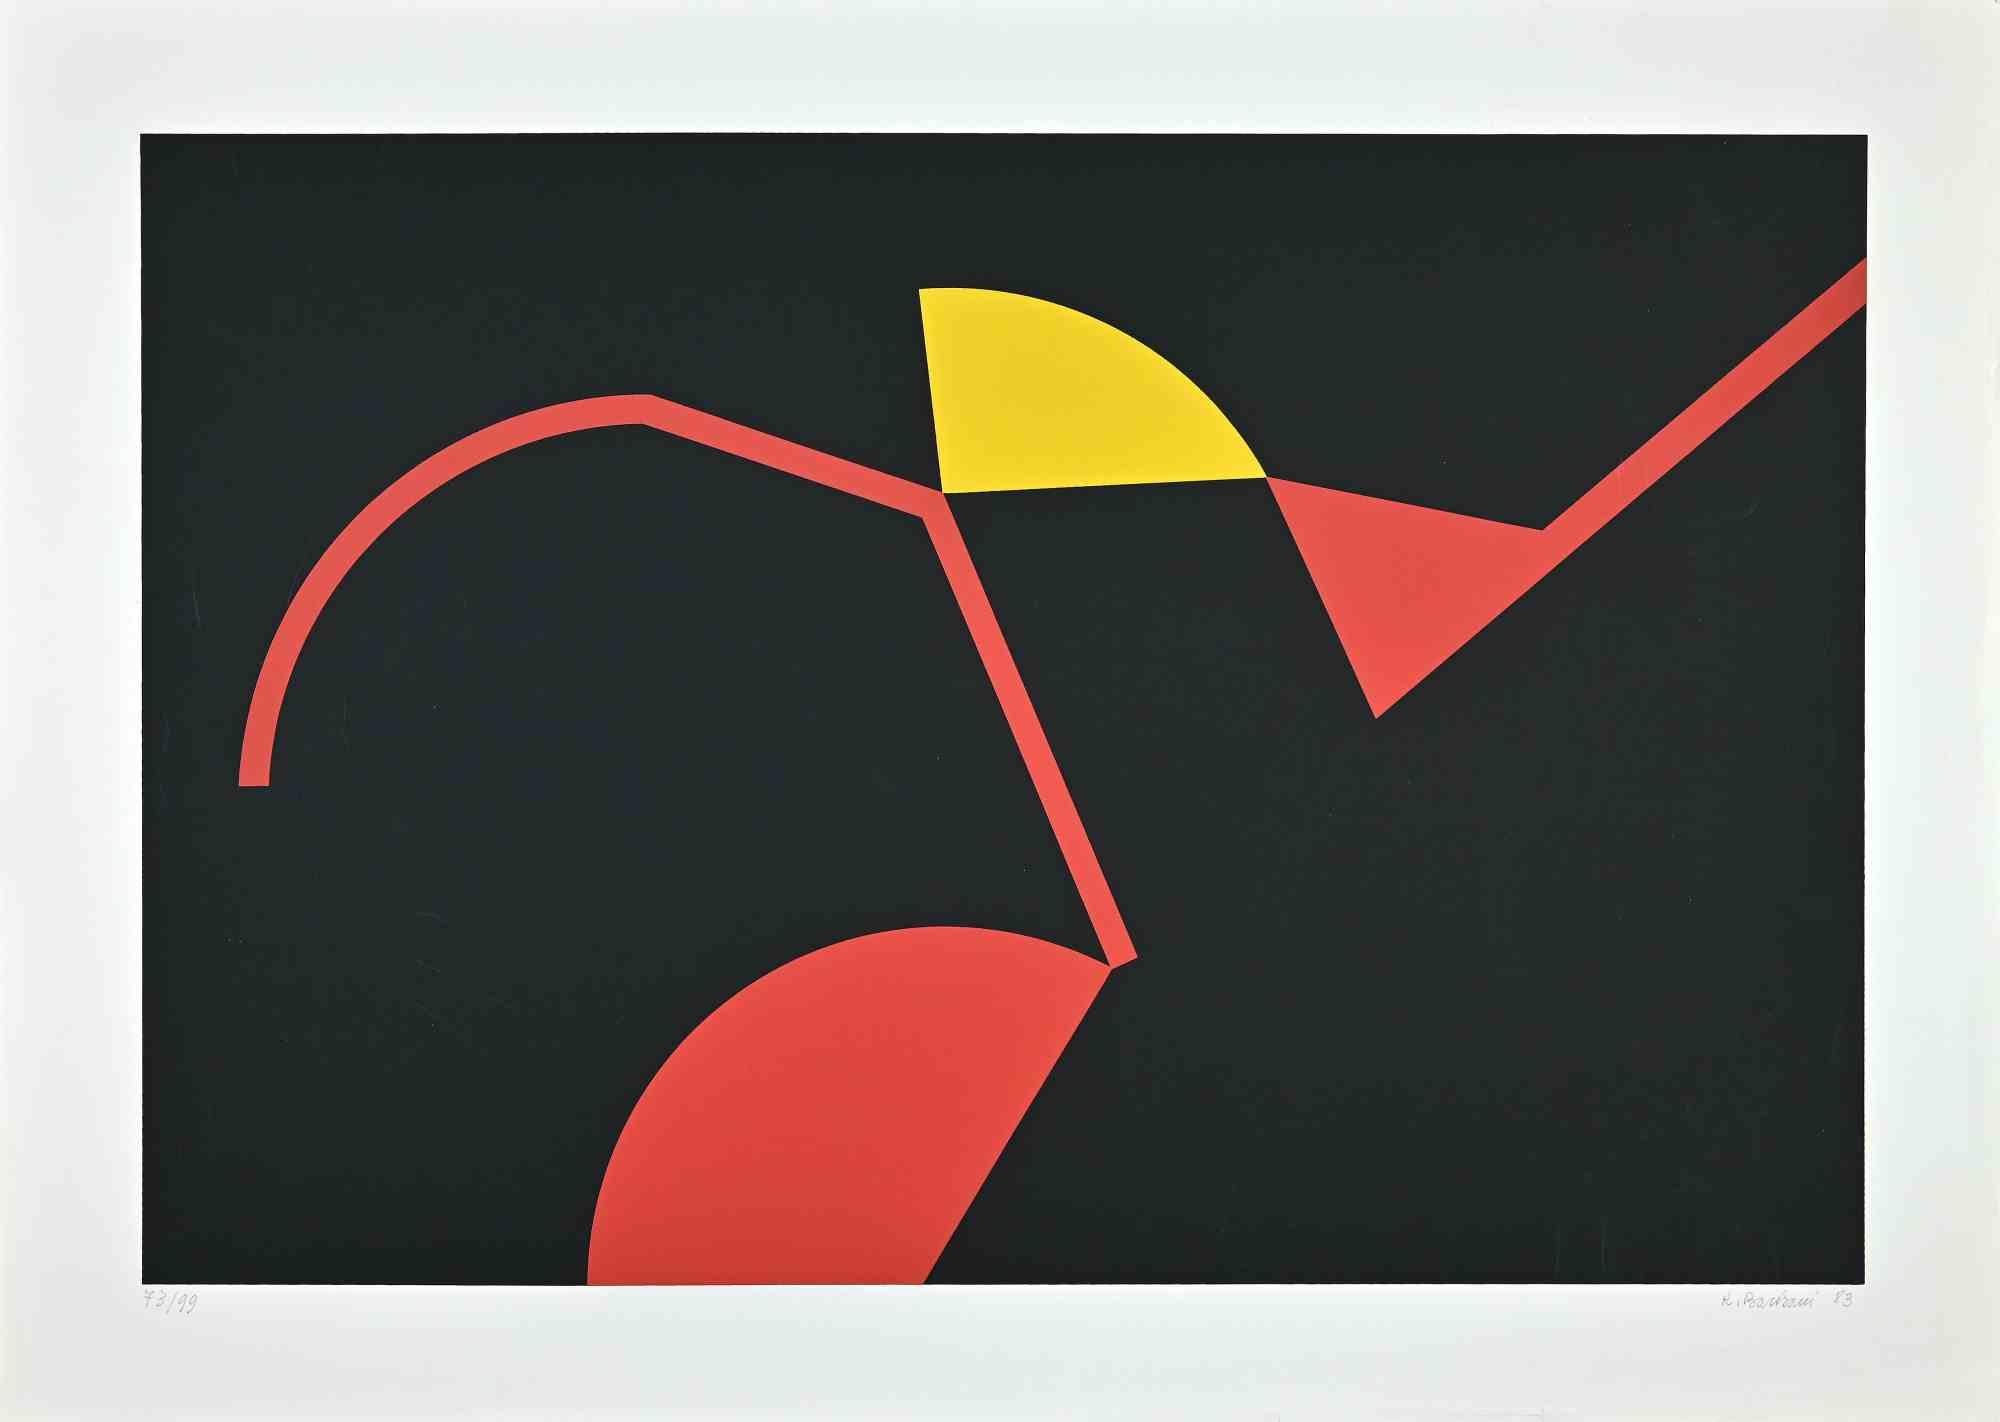 The Red and Yellow Structures is an original colored screen print realized by Renato Barisani in 1983.

Hand-signed and dated in pencil on the lower right. Numbered  in pencil on the lower left. Edition of 99 prints

Good conditions.

This serigraph